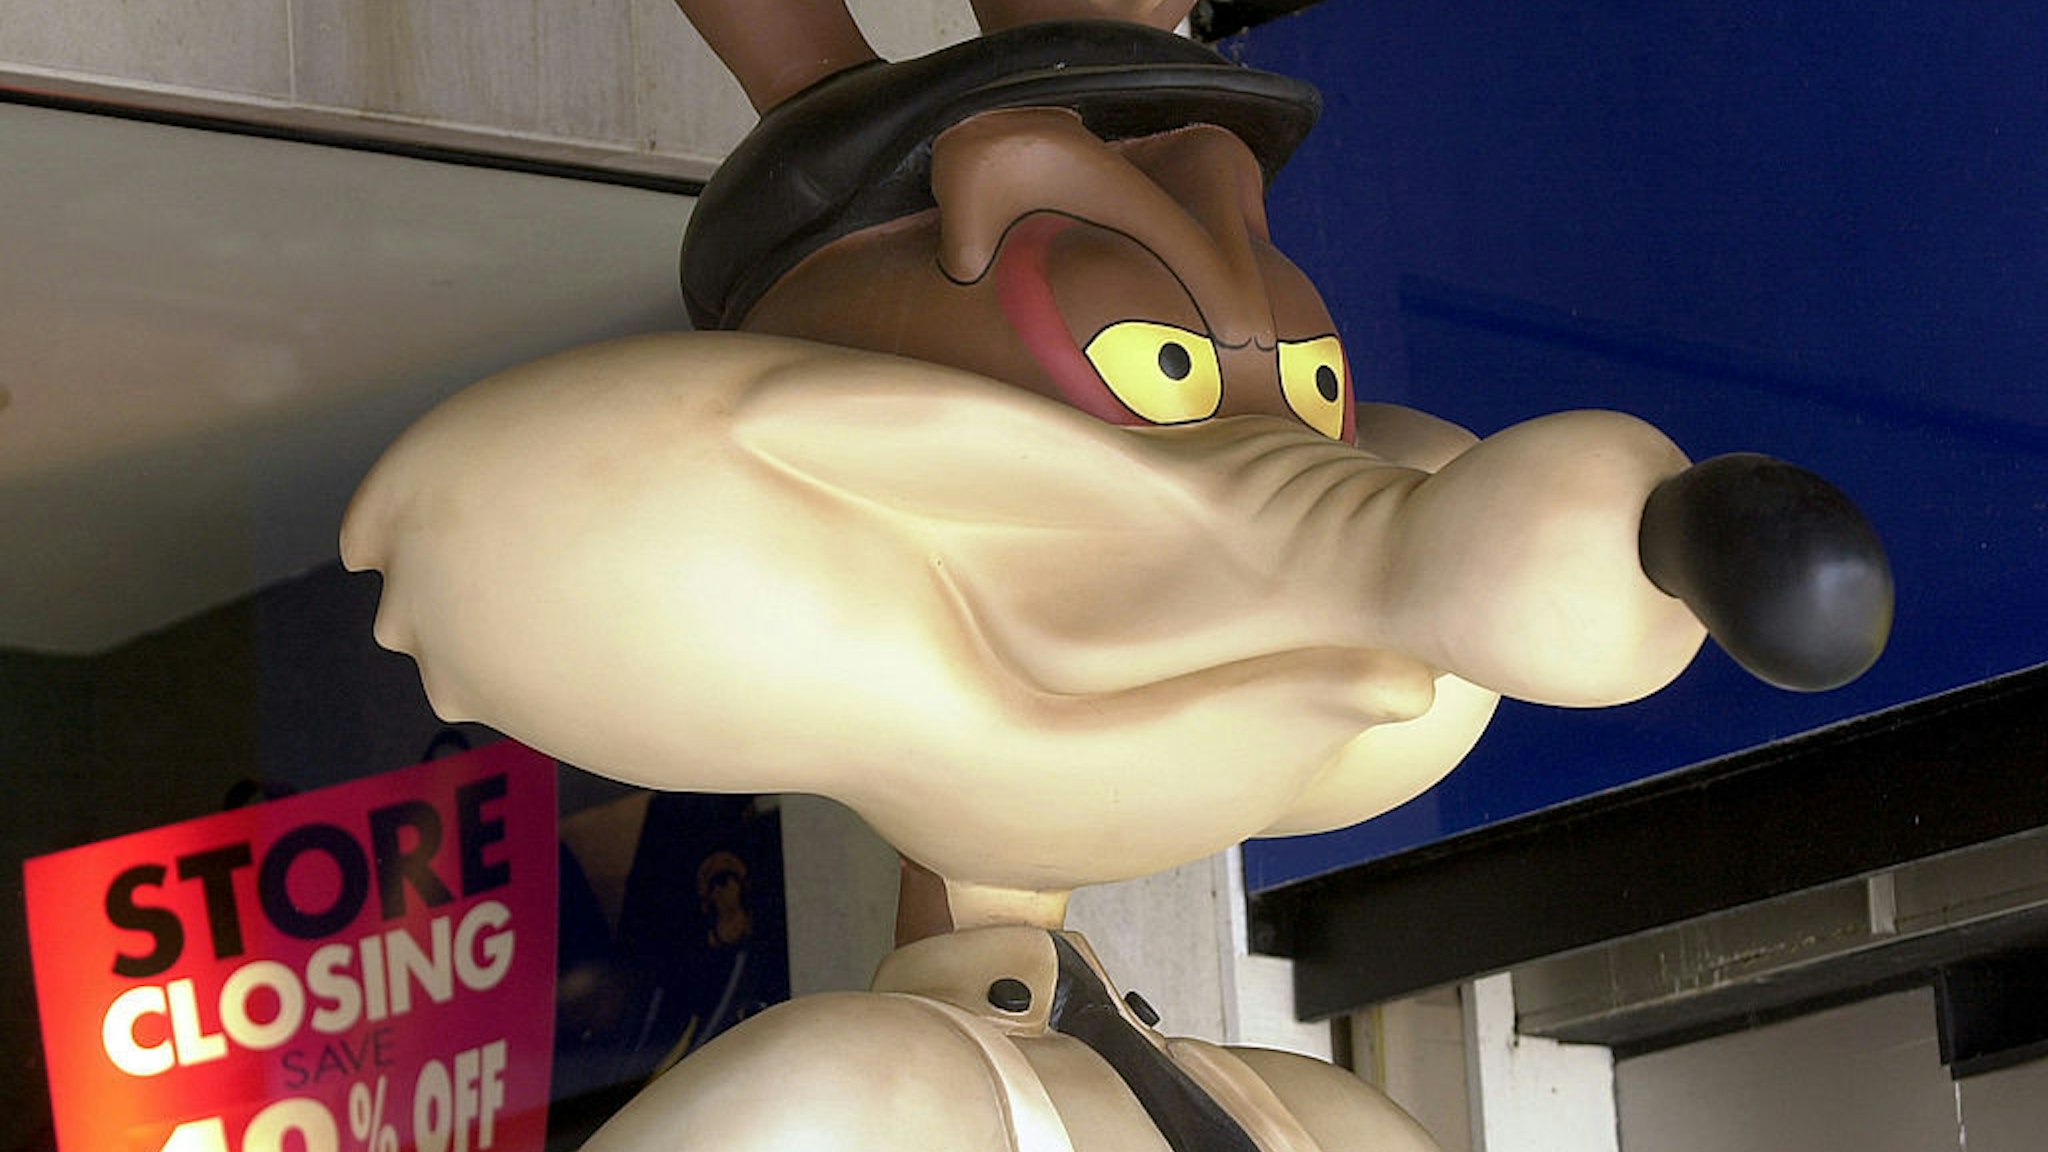 A statue of cartoon character Wile E. Coyote is displayed outside of a Warner Bros. Studio Store July 9, 2001 on Pier 39 in San Francisco, CA . AOL Time Warner Inc. will close its U.S. based Warner Bros. Studio Stores by the end of October, with a loss of 3,800 jobs, after failing to find a buyer for the chain, a company spokeswoman said. (Photo by Justin Sullivan/Getty Images)